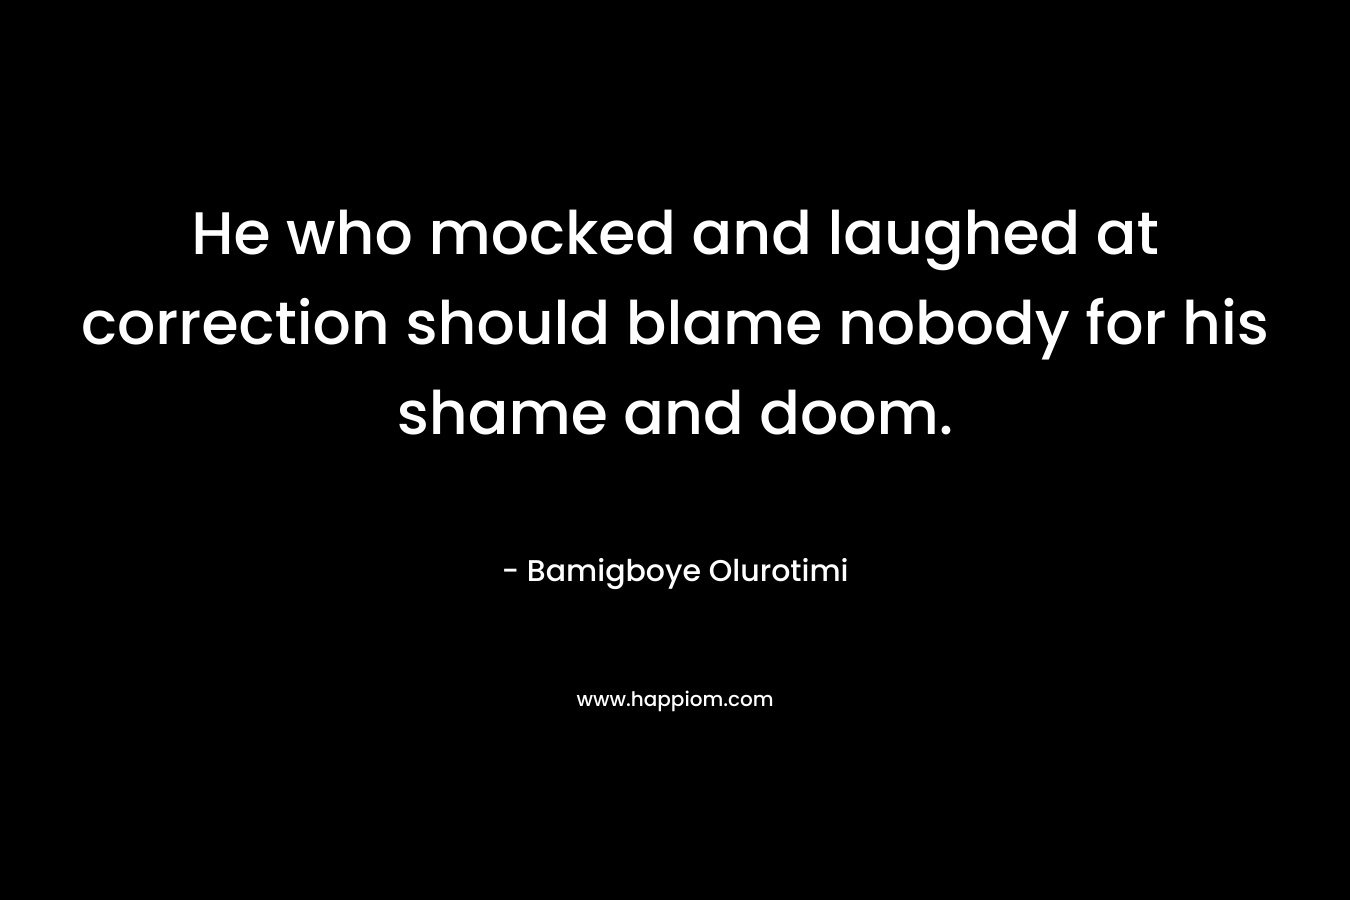 He who mocked and laughed at correction should blame nobody for his shame and doom. – Bamigboye Olurotimi